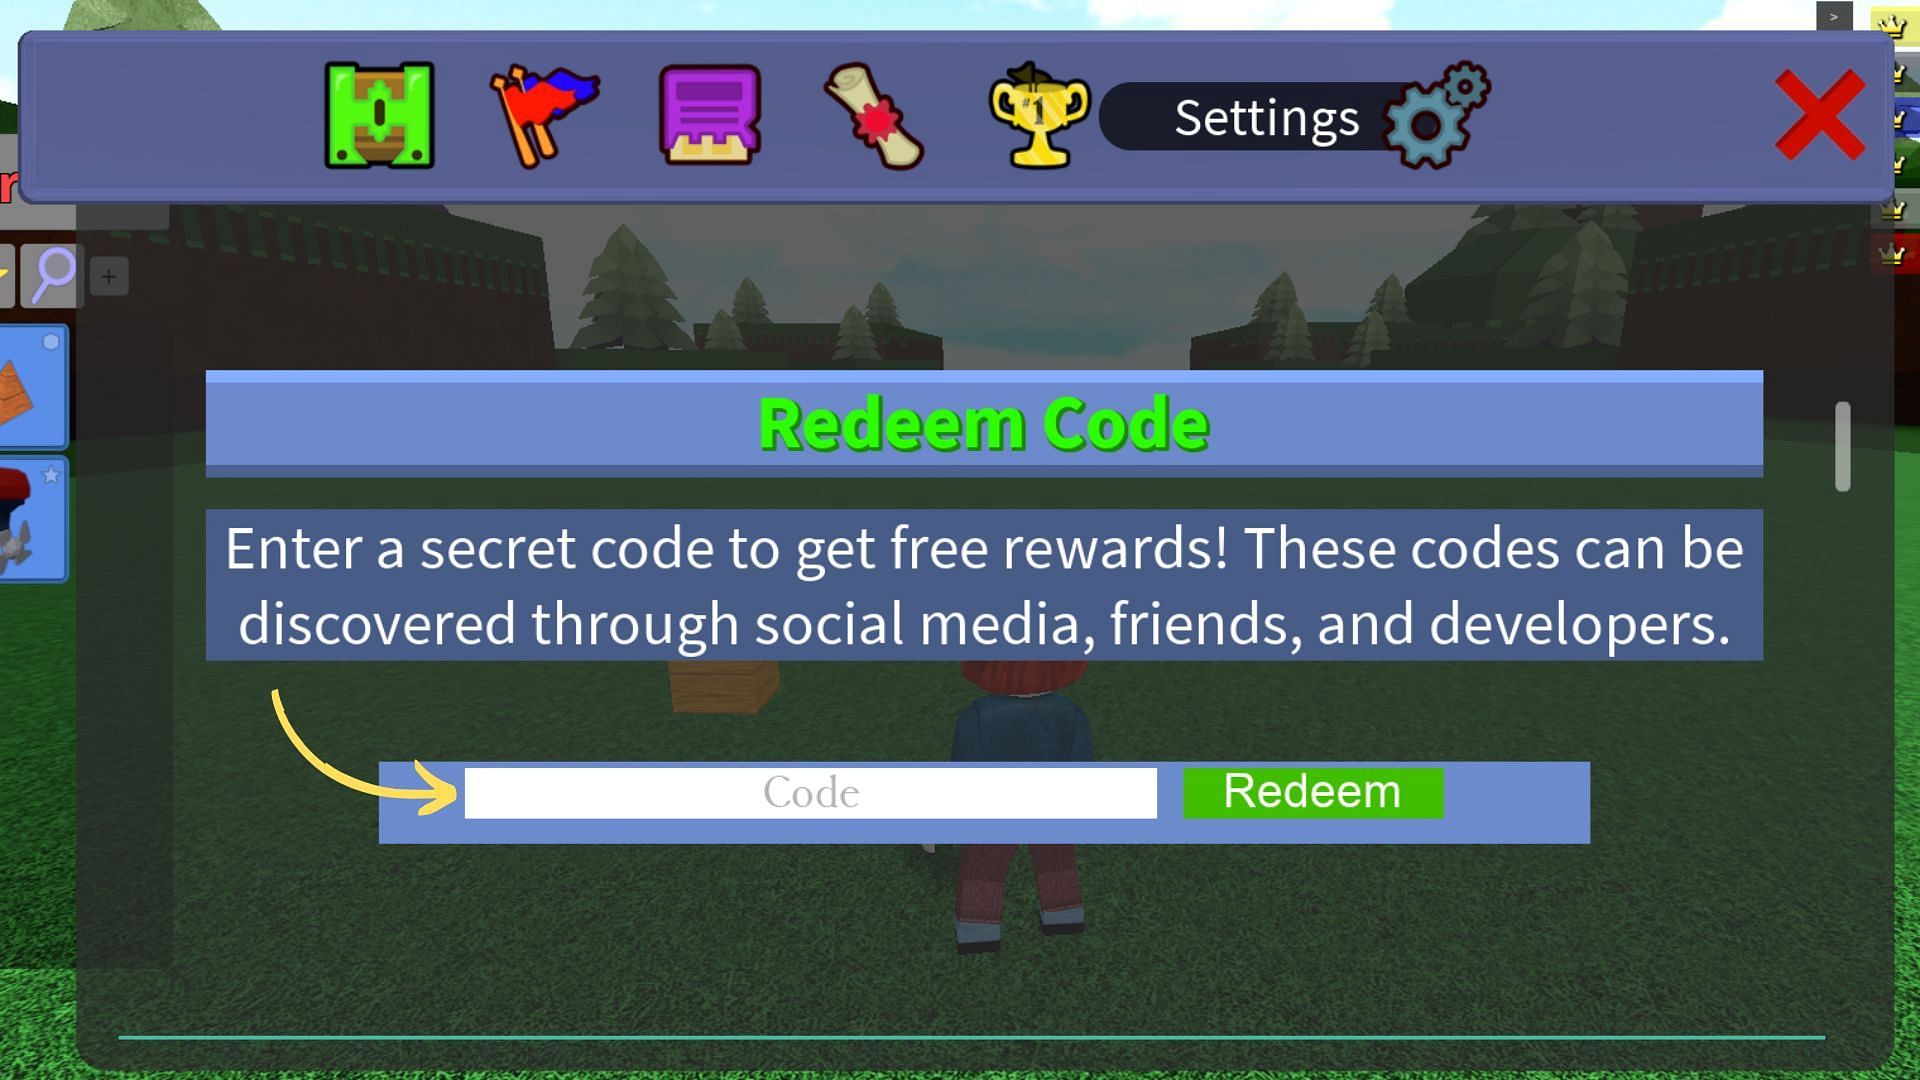 Build A Boat For Treasure code and how to redeem them (Image via Roblox and Sportskeeda)